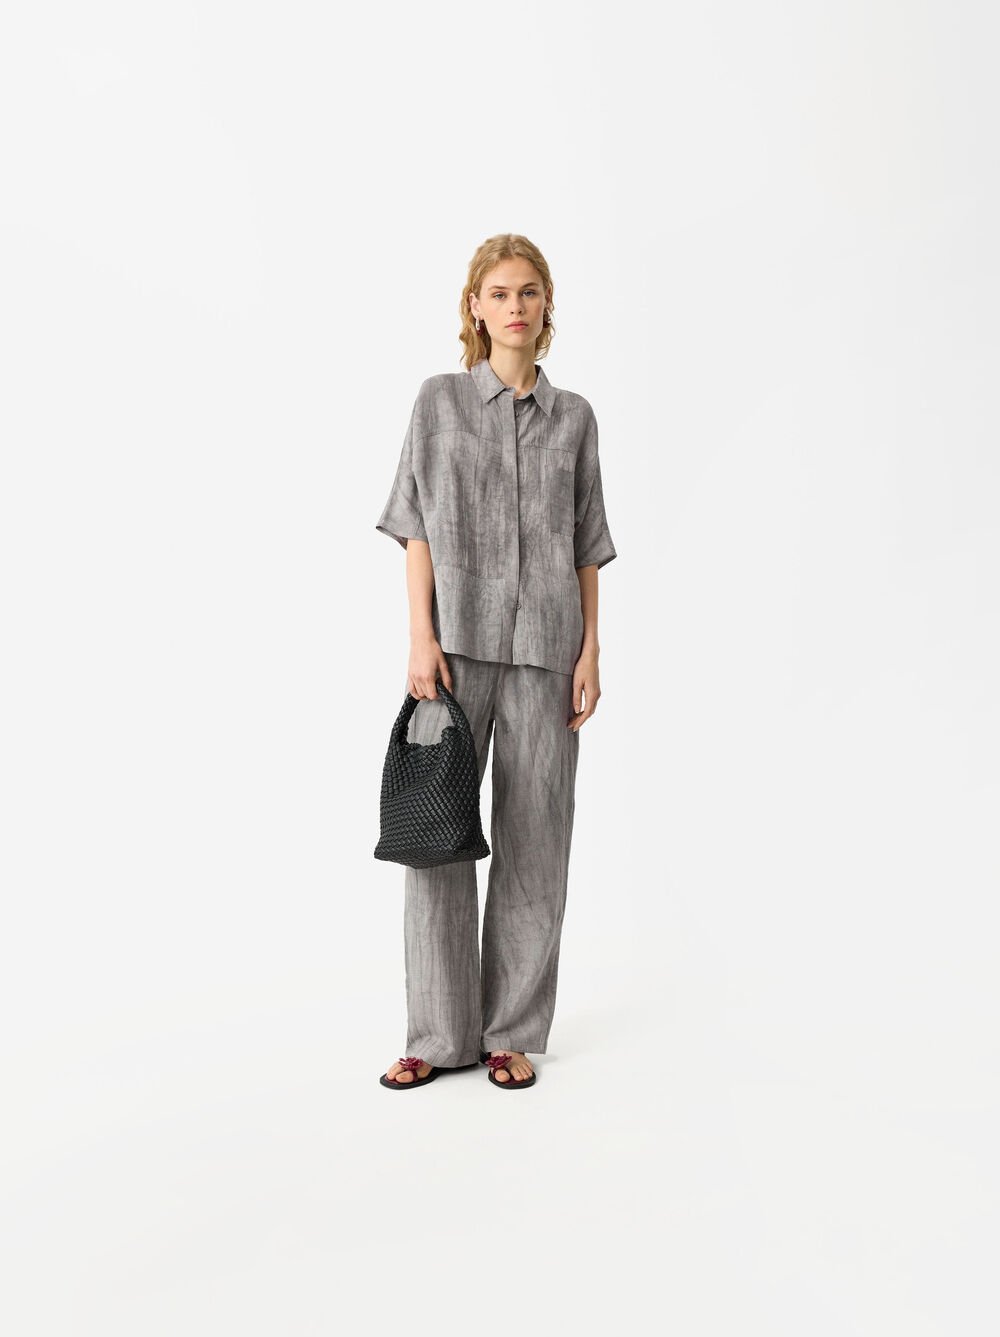 Printed Loose-Fitting Trousers